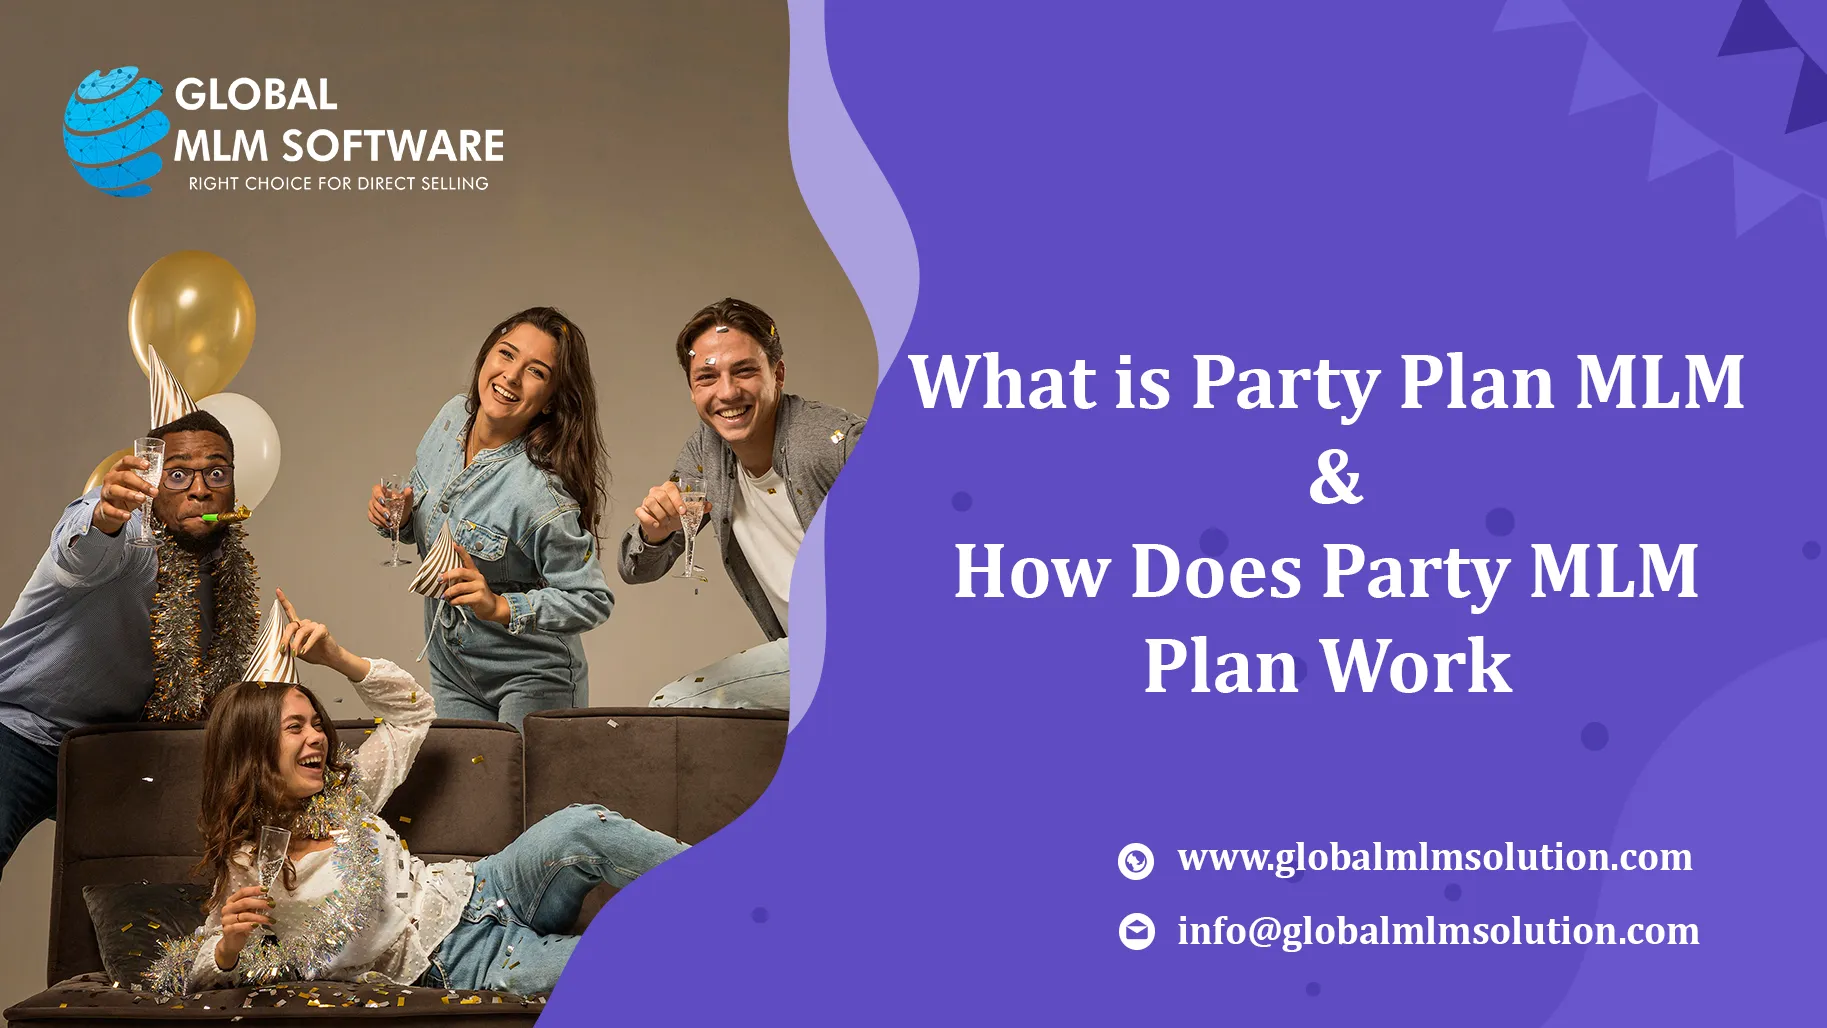 What Is Party MLM Plan & How Does Party MLM Plan Work?